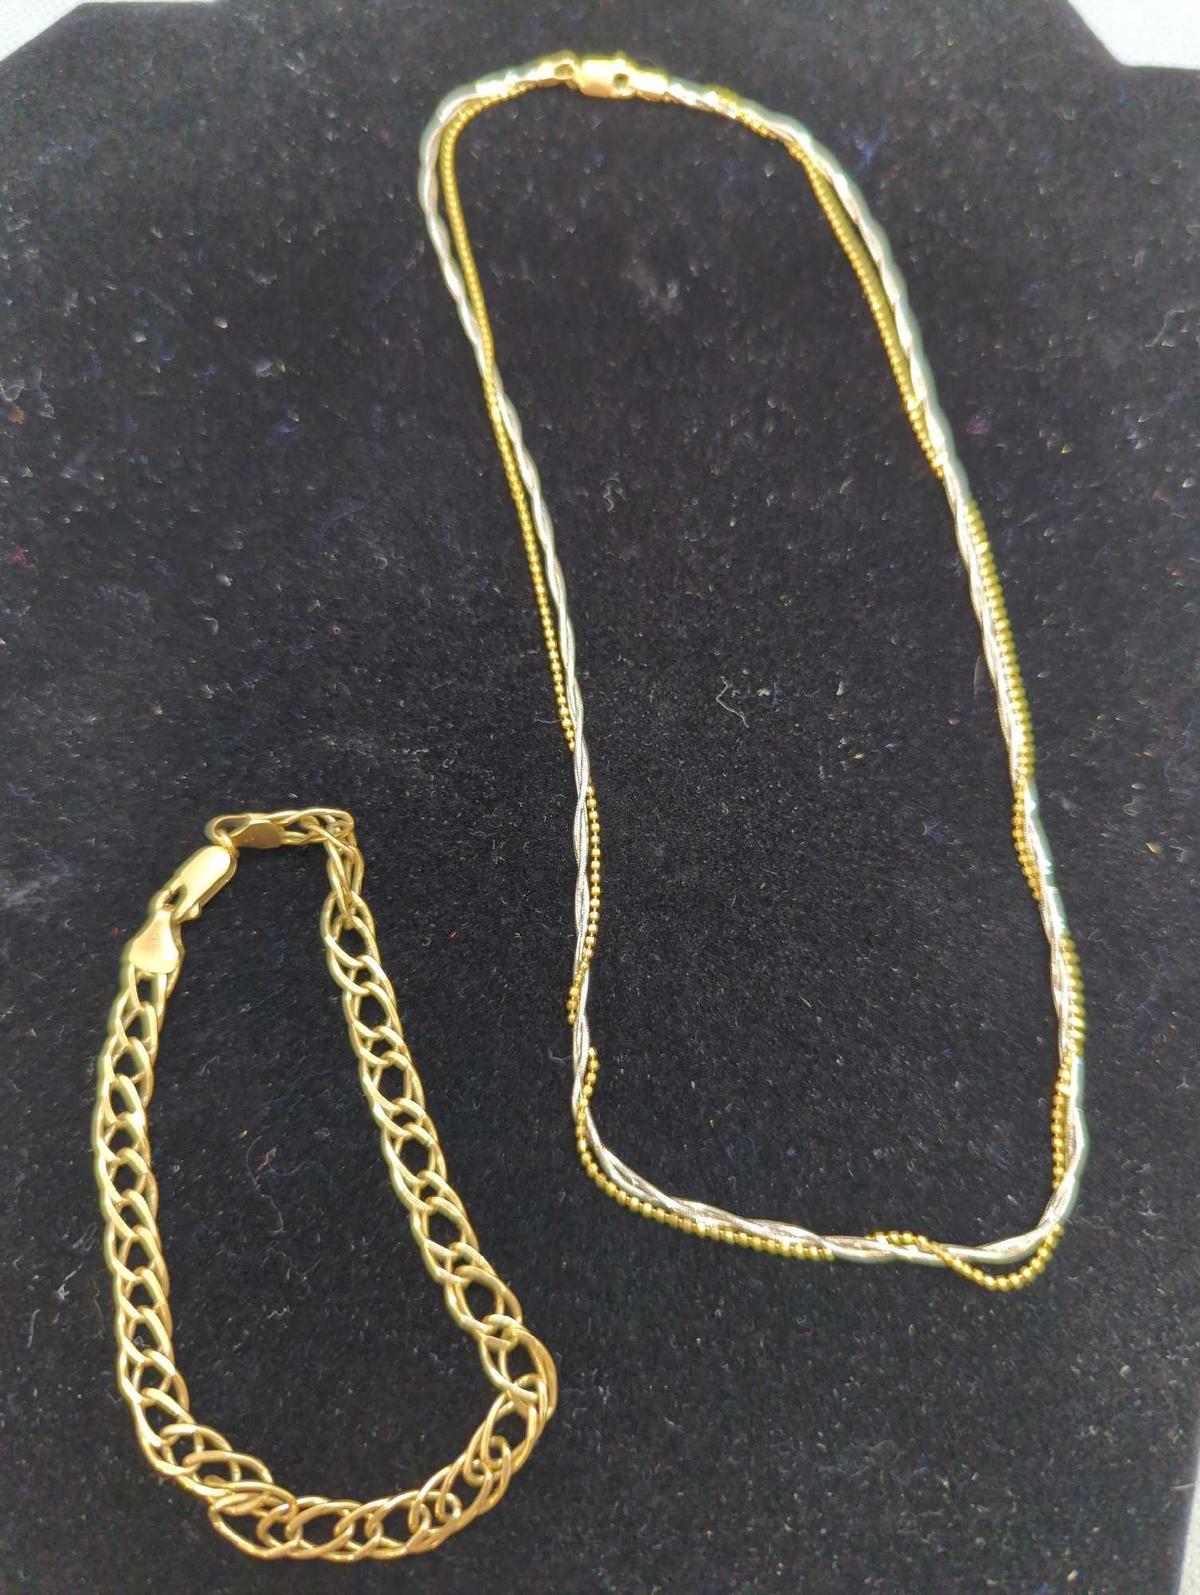 TWO TONE SILVER & GOLD CHAIN NECKLACE 585 ITALY, GOLD LINK BRACELET 585 ITALY